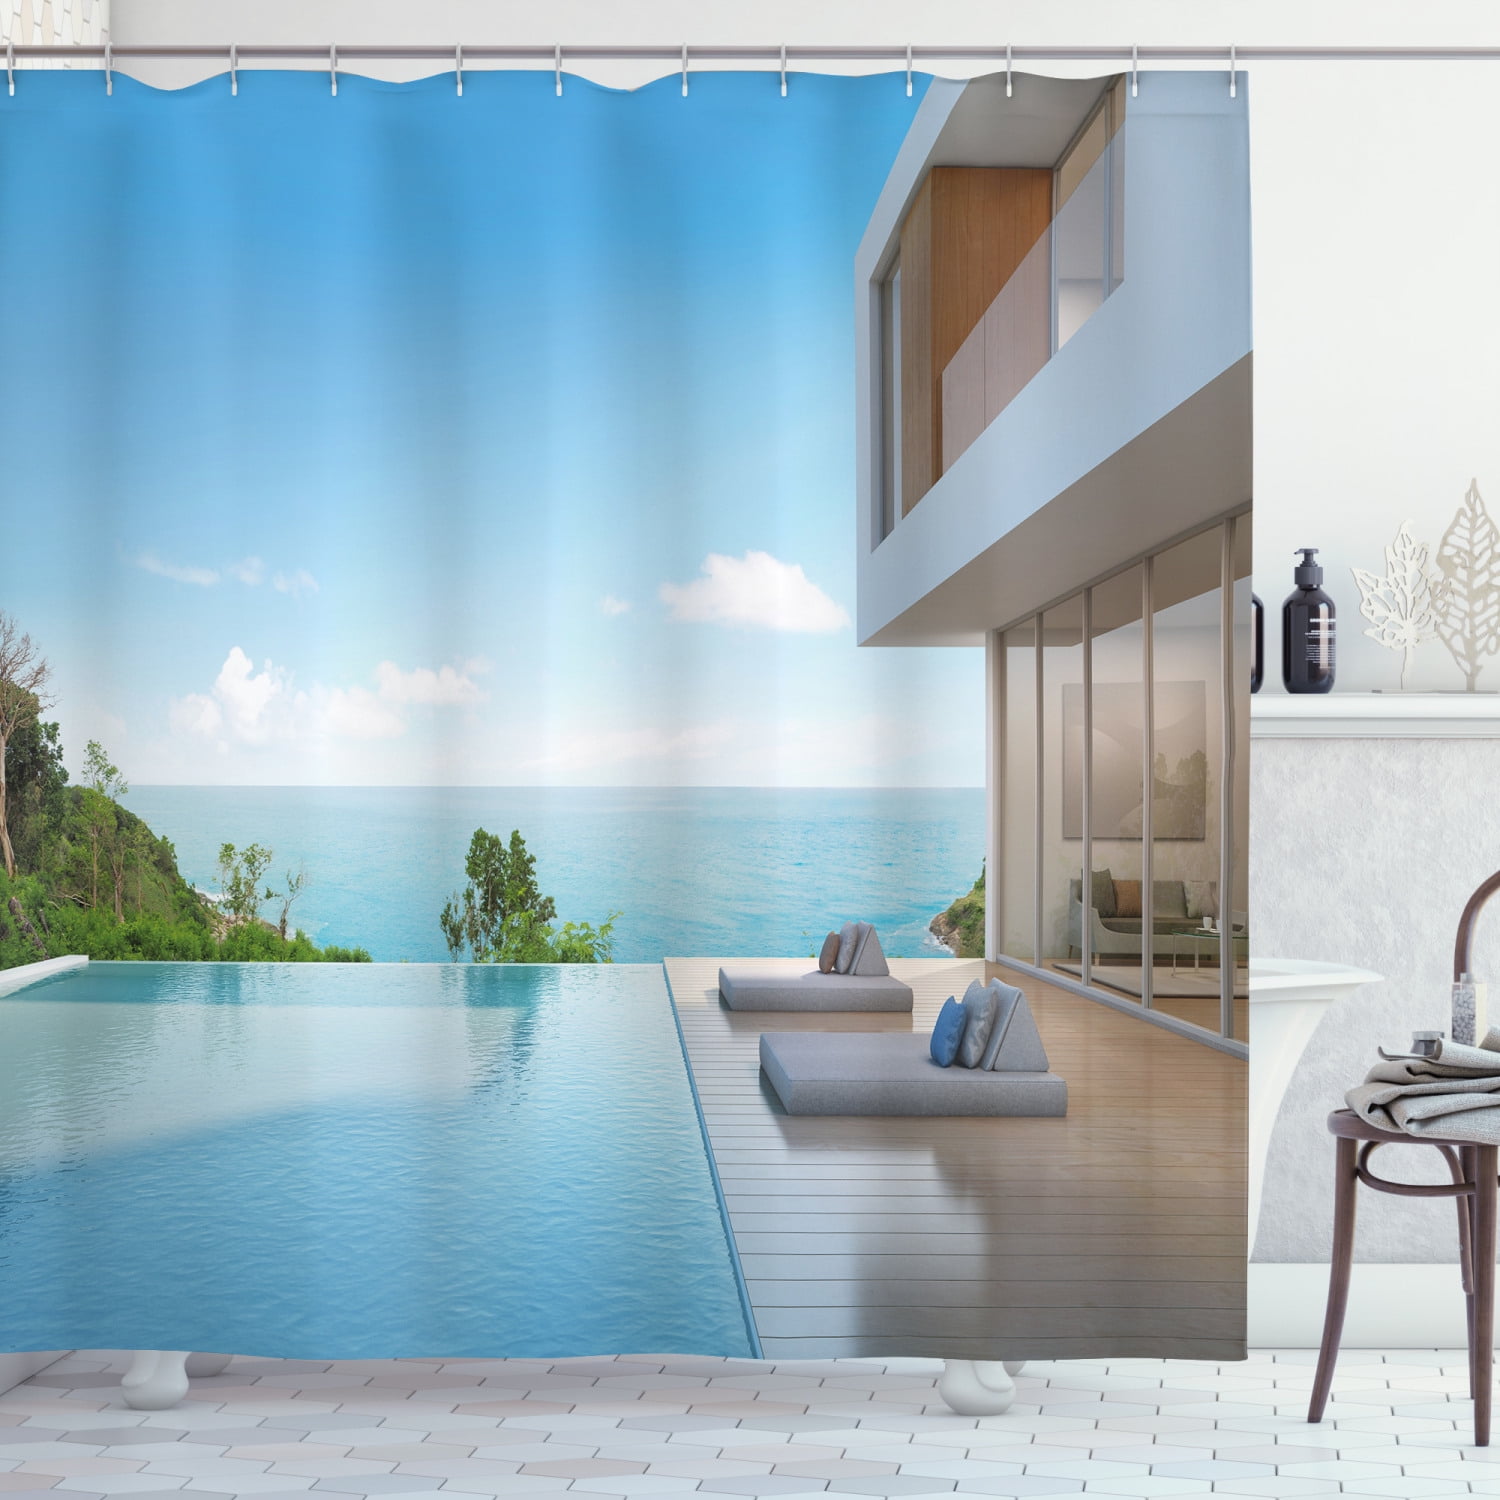 Details about   3D Modern House Bathroom Shower Curtain WATERPROOF Extra Long Wide with Hooks 